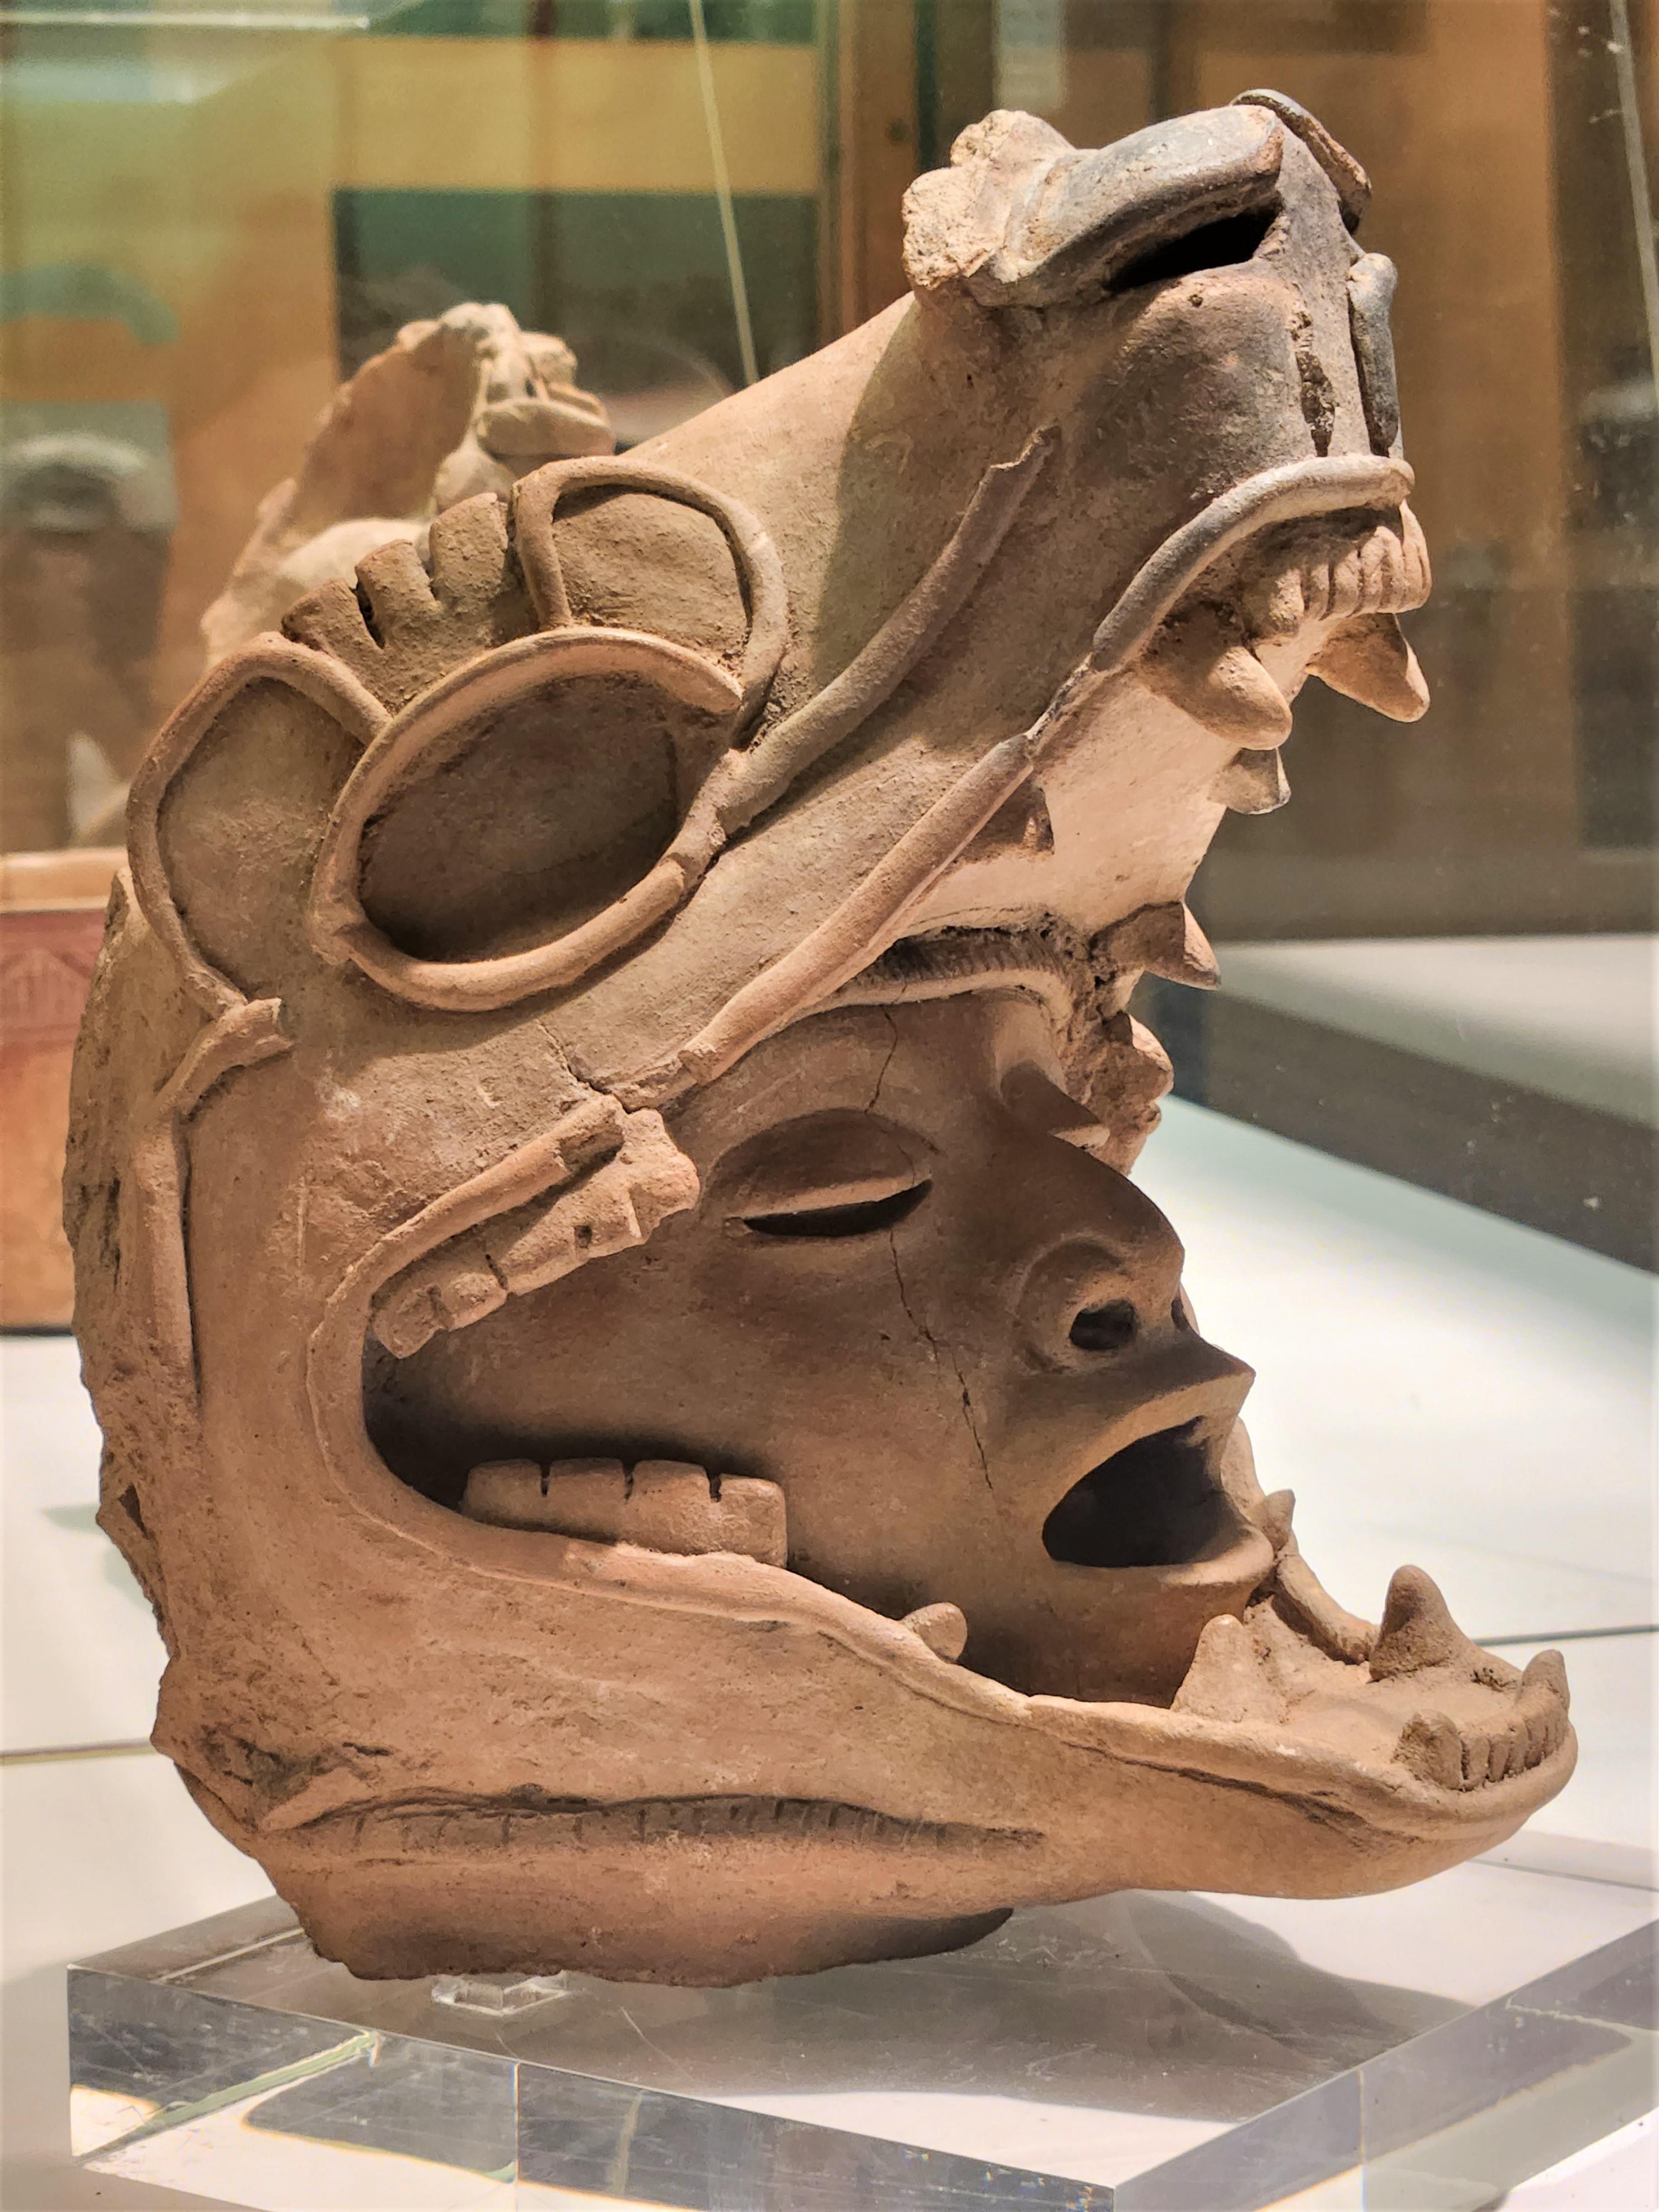 Terracotta head in jaguar's jaws. Veracruz, Mexico, Late Classic period, Remojadas style, ca. 600-800 AD. American Museum of Natural History collection.jpg